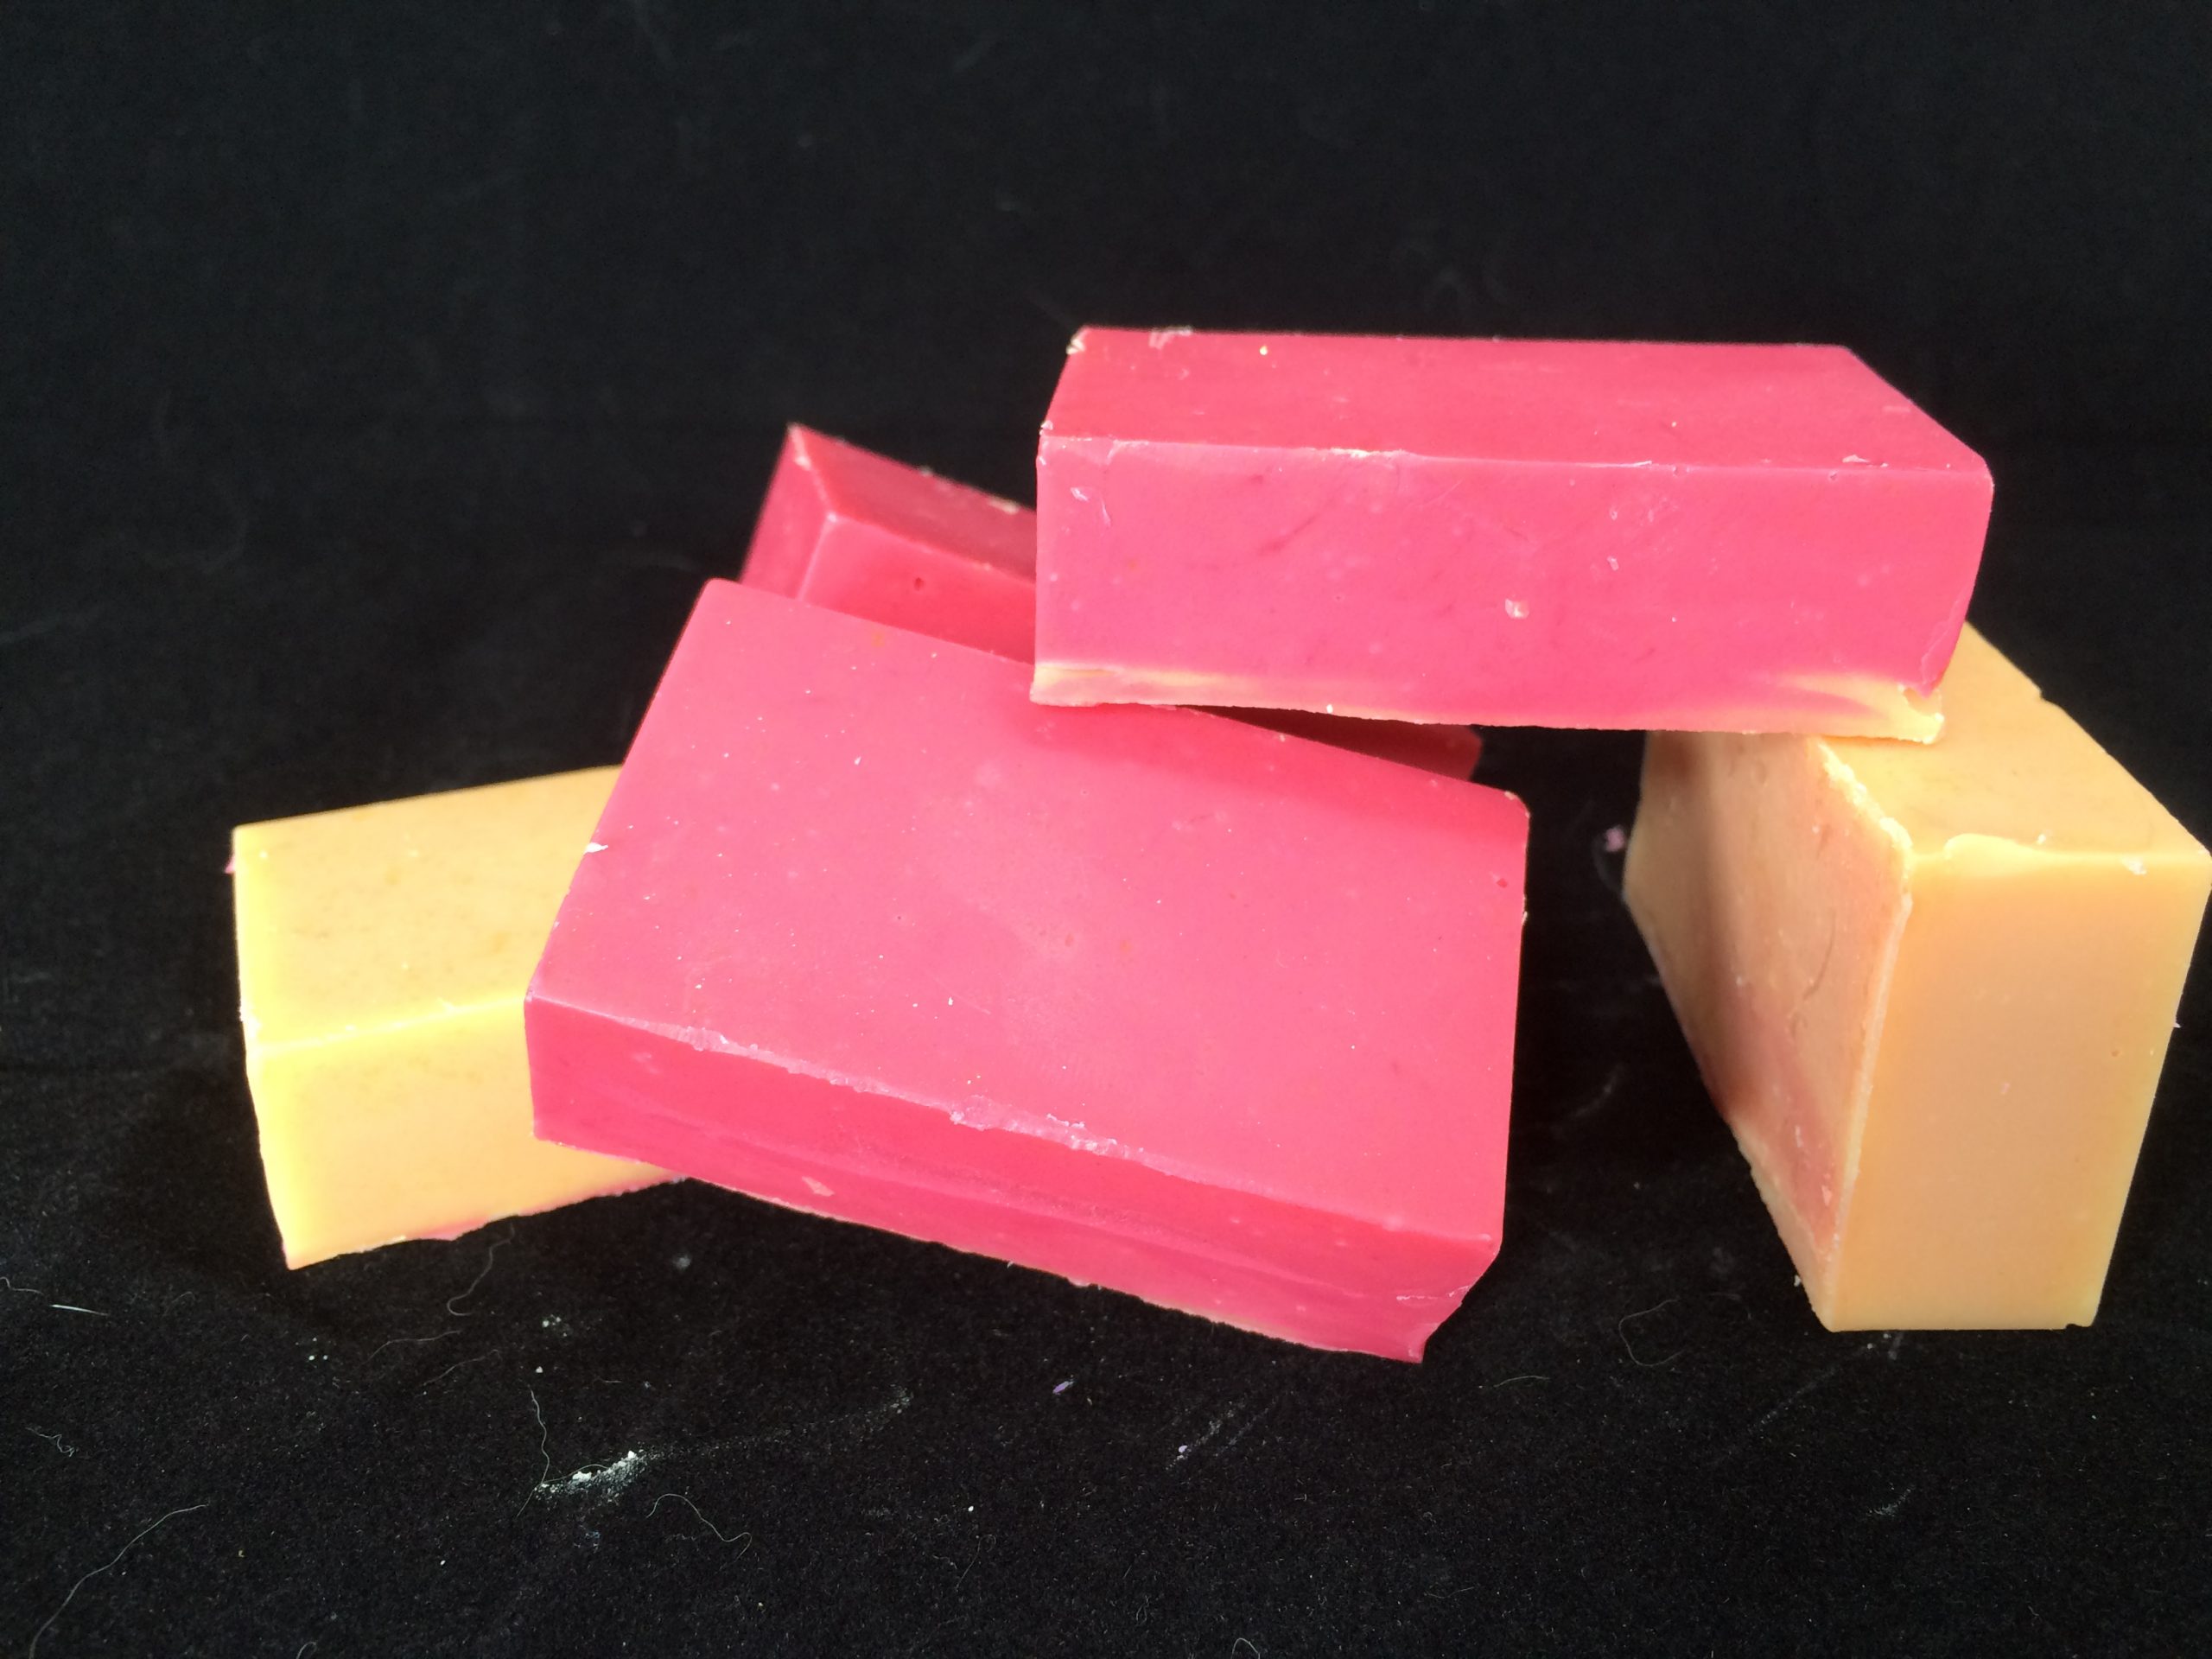 Handmade soap with goat milk, flash peaches, trial size